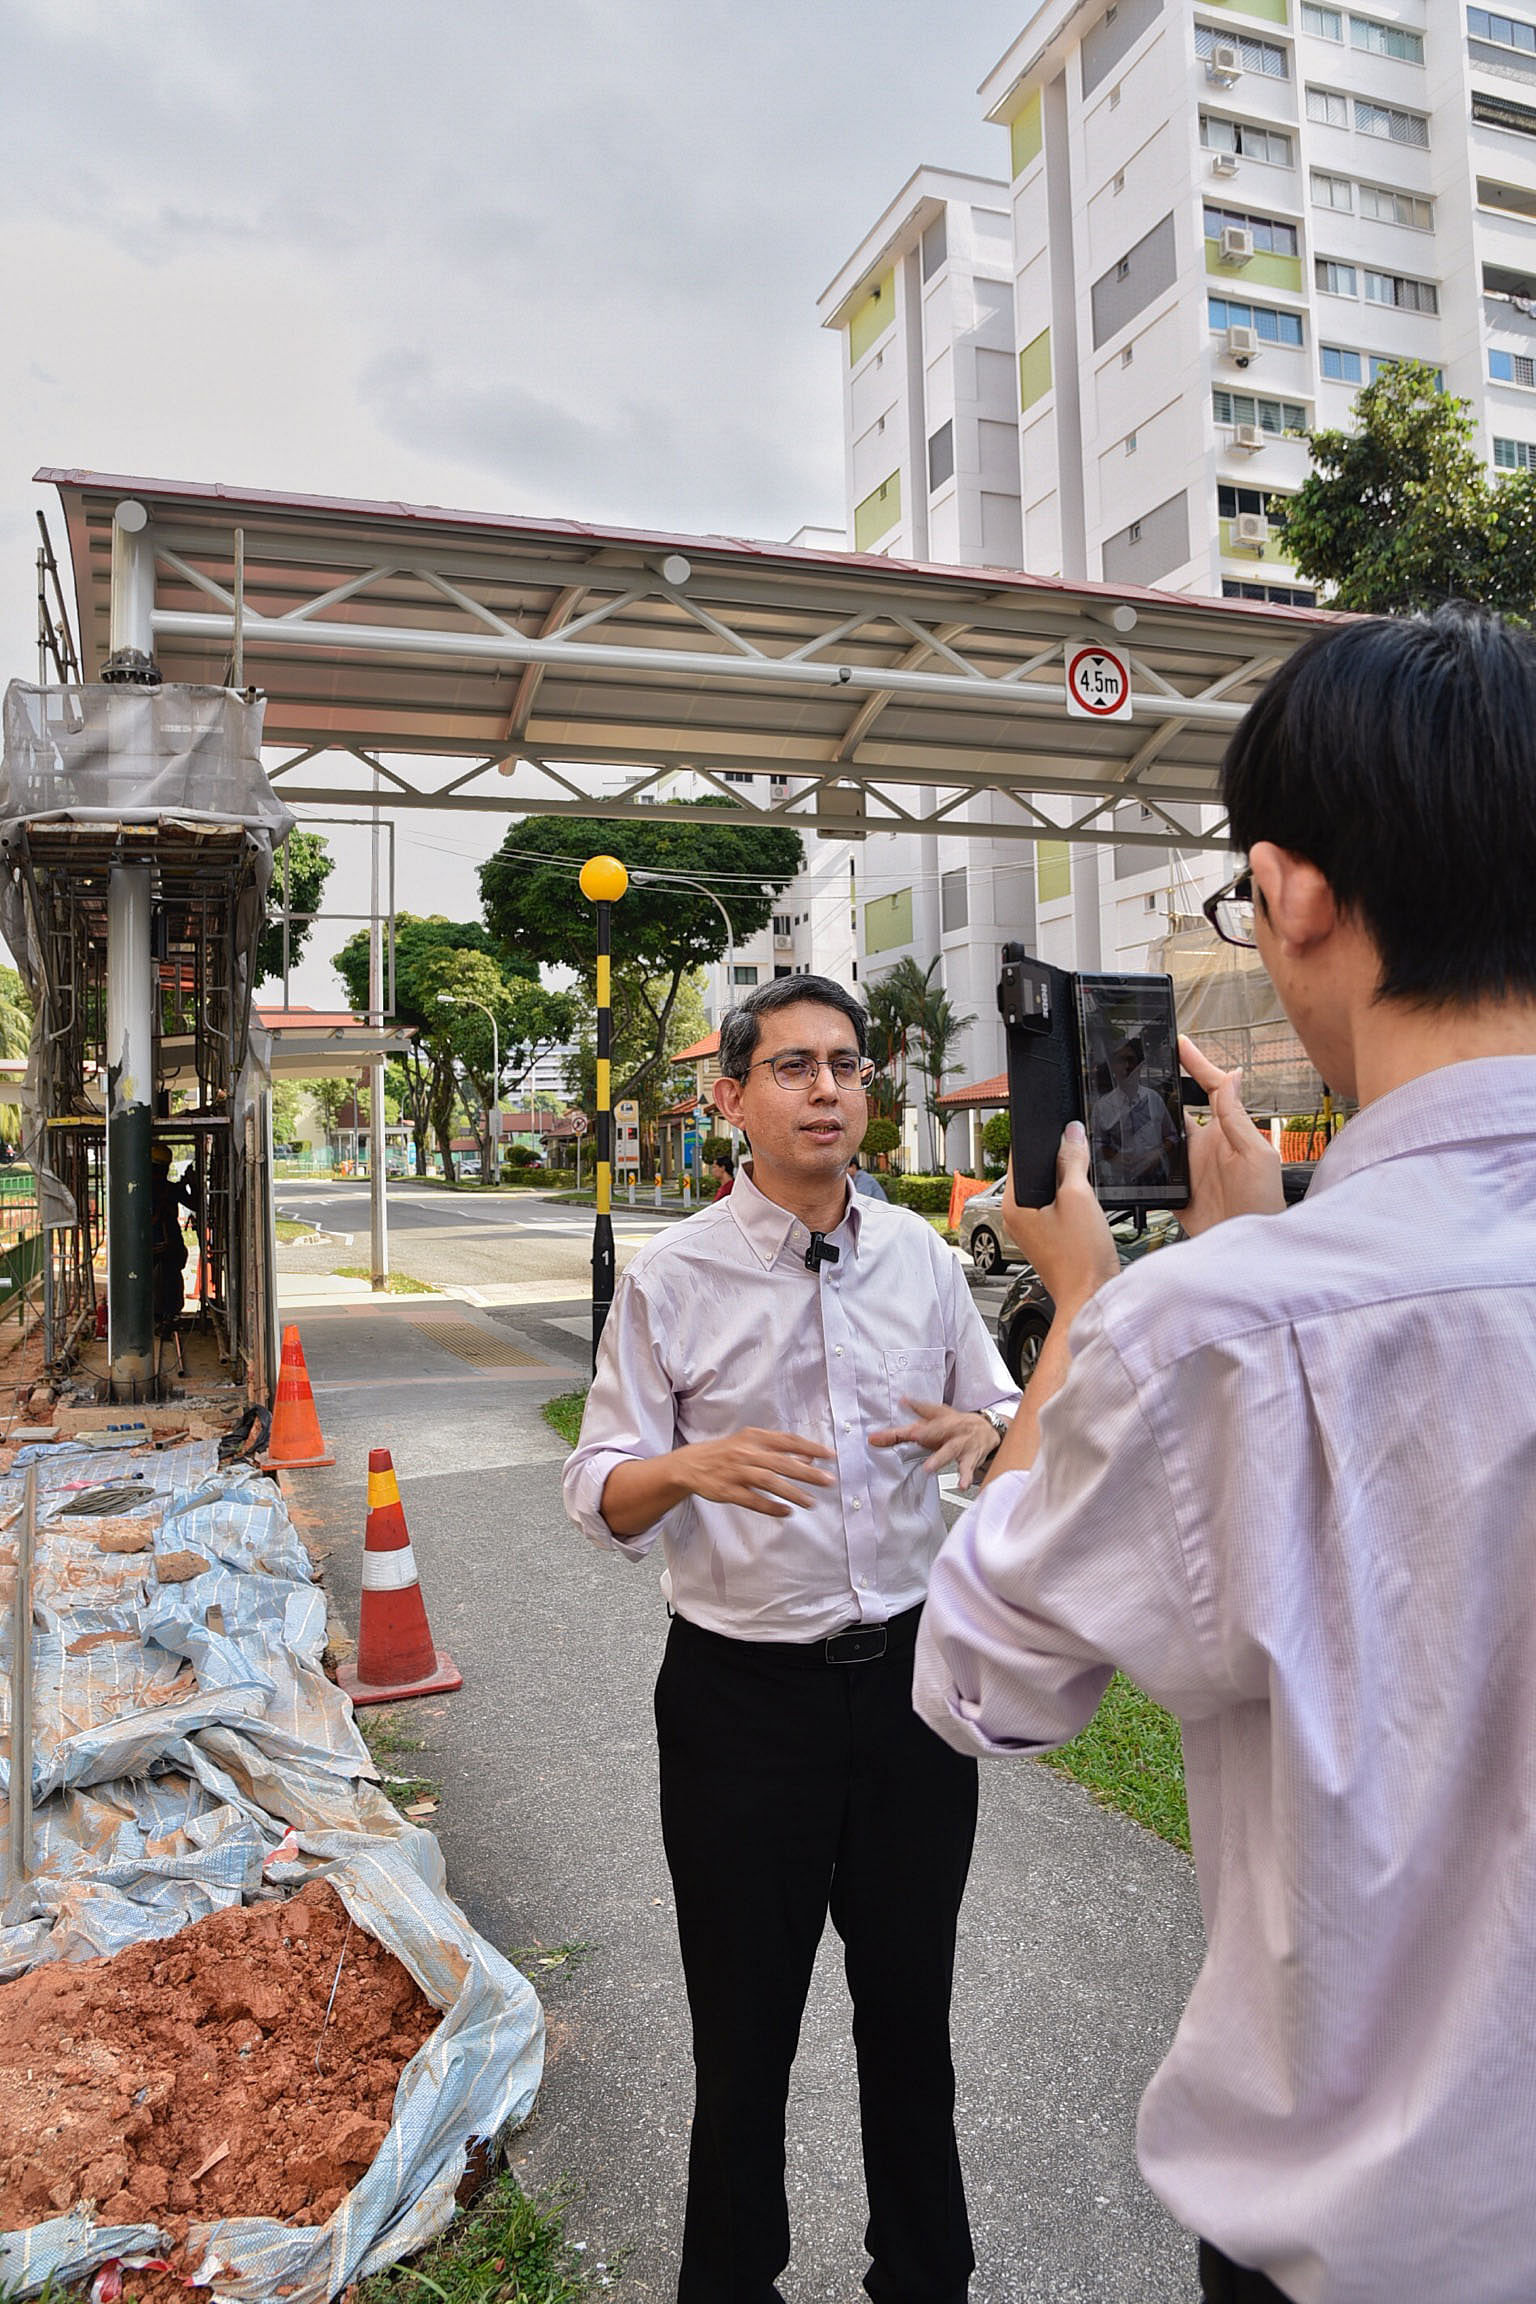 Senior Parliamentary Secretary Muhammad Faishal Ibrahim doing a Facebook Live broadcast about a new covered walkway for his Nee Soon Central constituents. Associate Professor Faishal says he has used Facebook Live to answer residents' questions, such